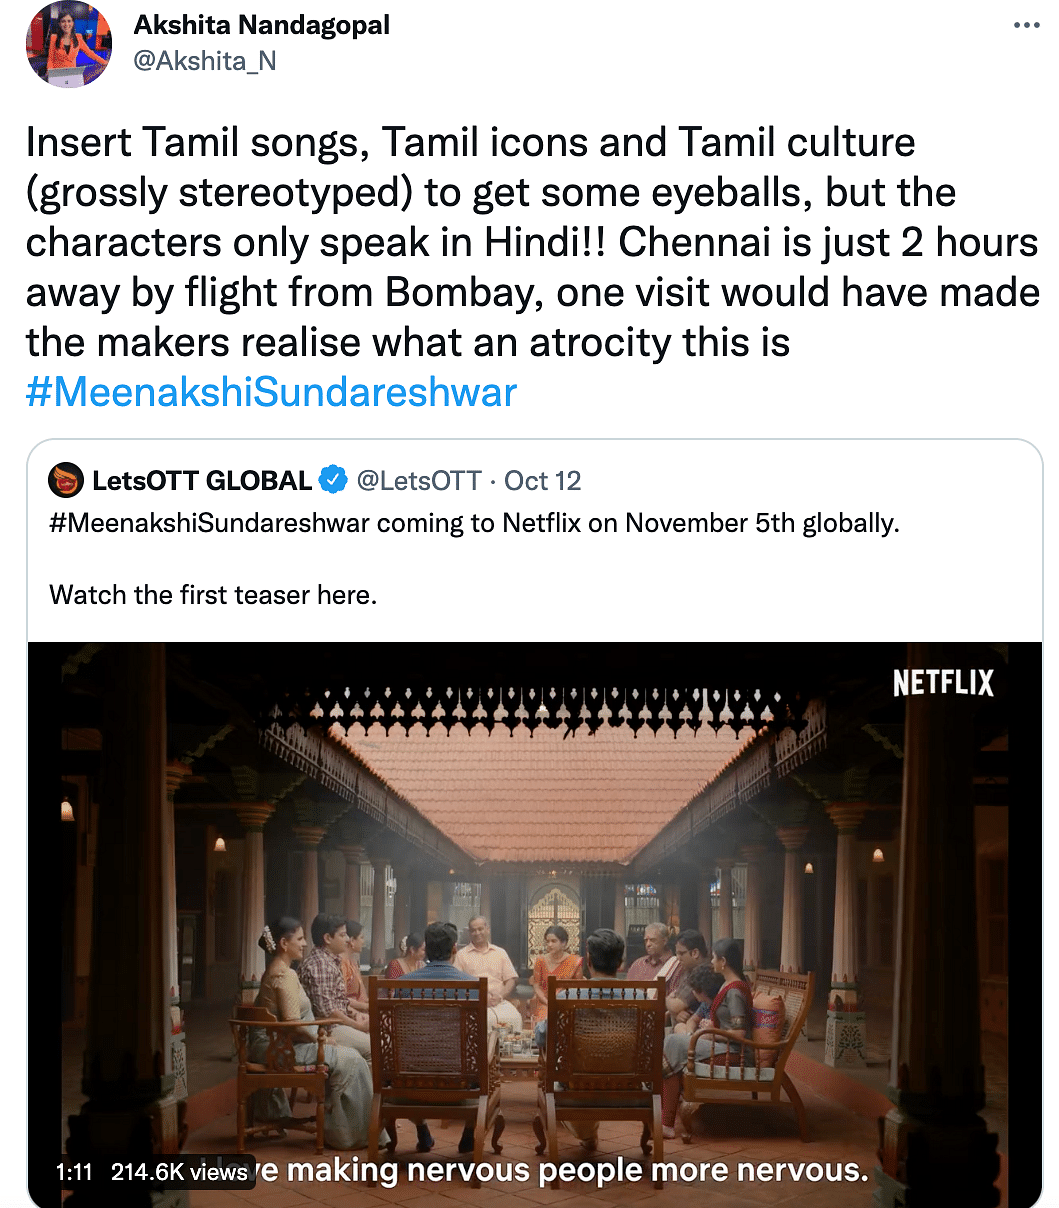 The film, starring Sanya Malhotra, has been called out for stereotyping Tamilians.